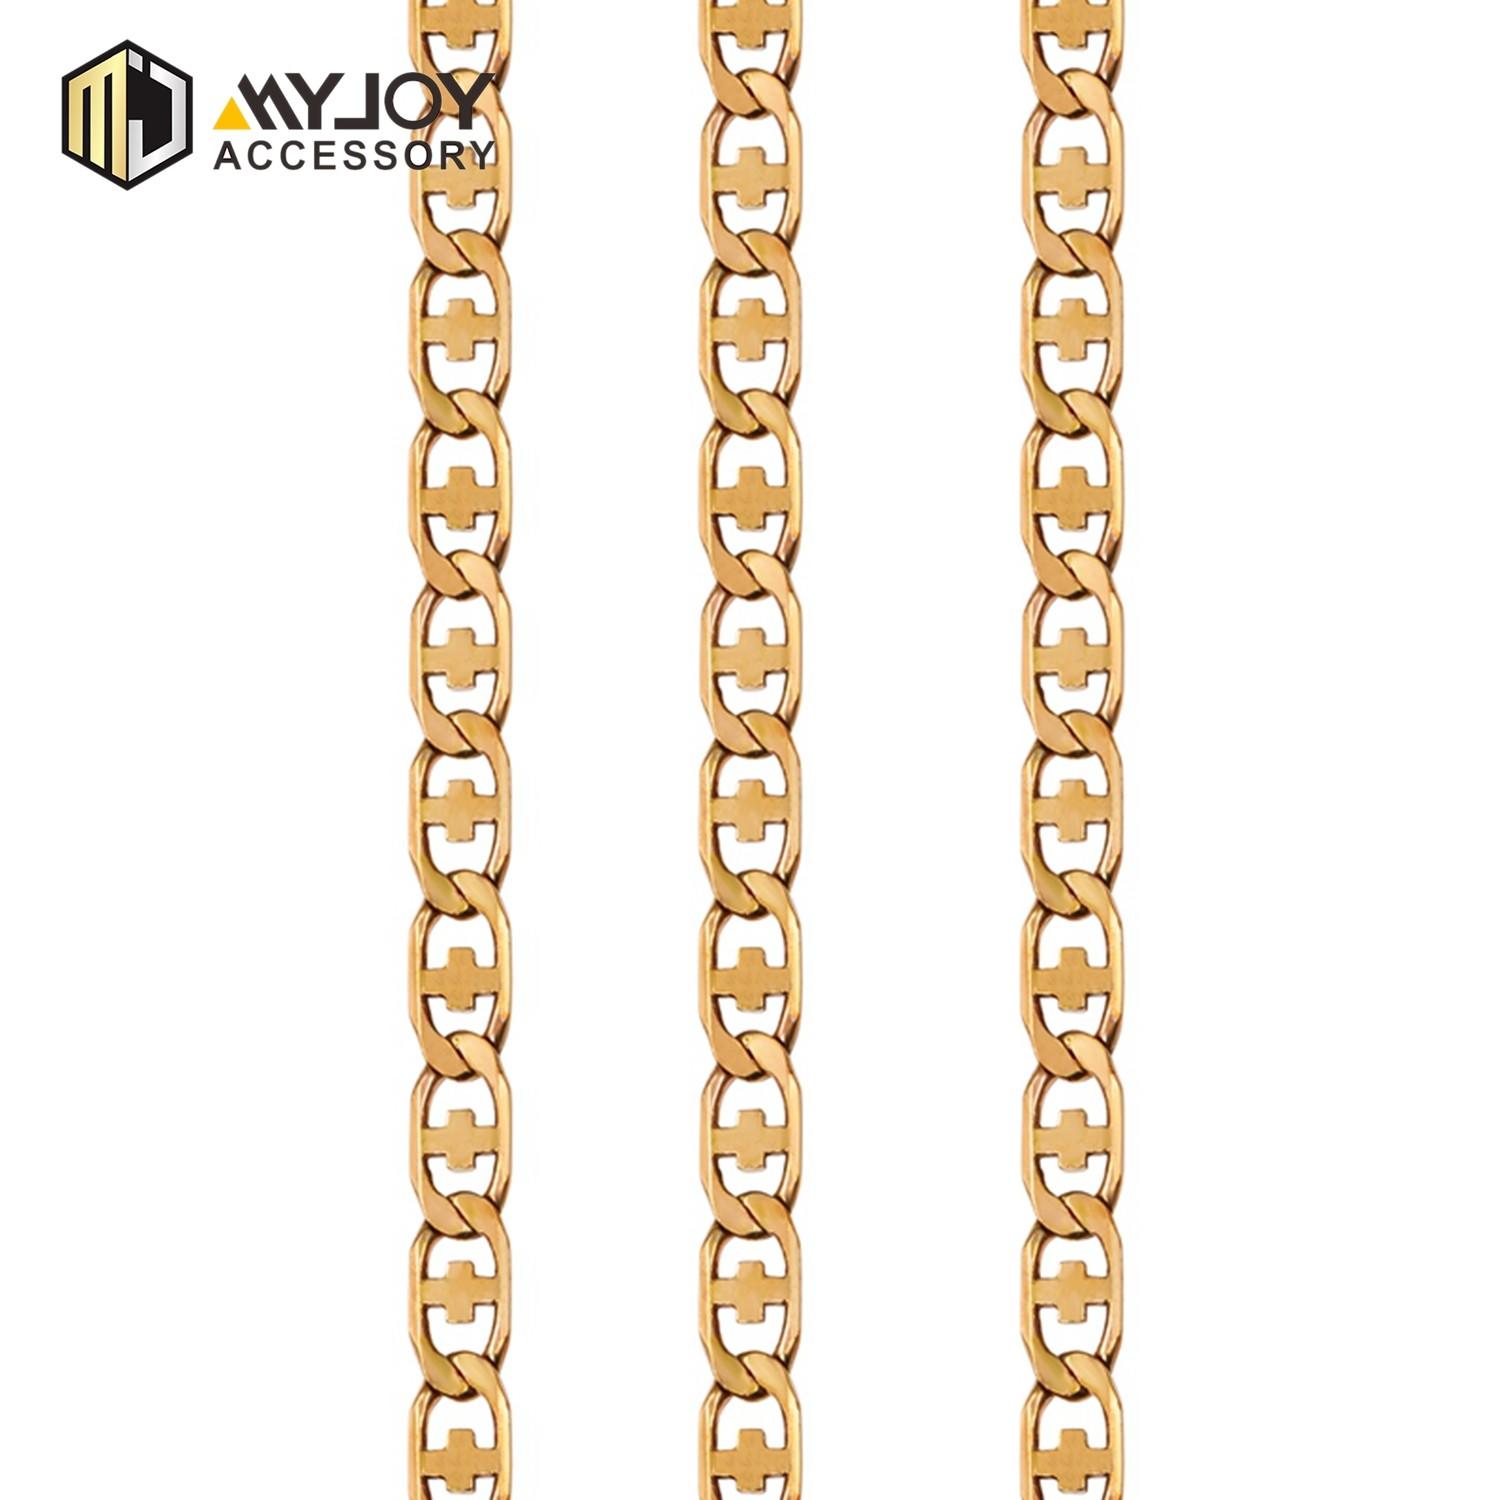 MYJOY New strap chain for sale for purses